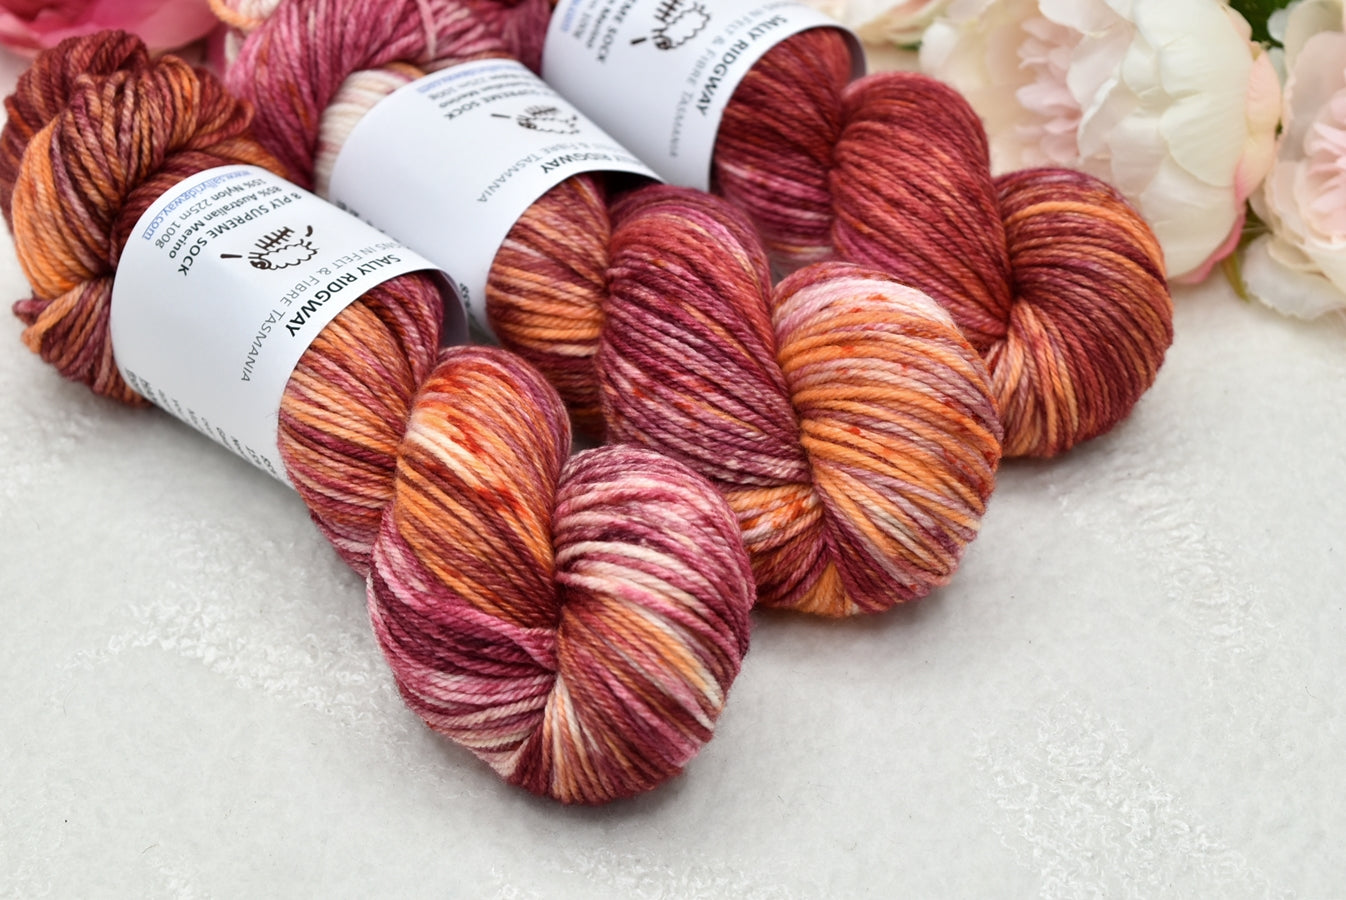 8 ply Supreme Sock in Apricot Delicious| 8 Ply Supreme Sock | Sally Ridgway | Shop Wool, Felt and Fibre Online